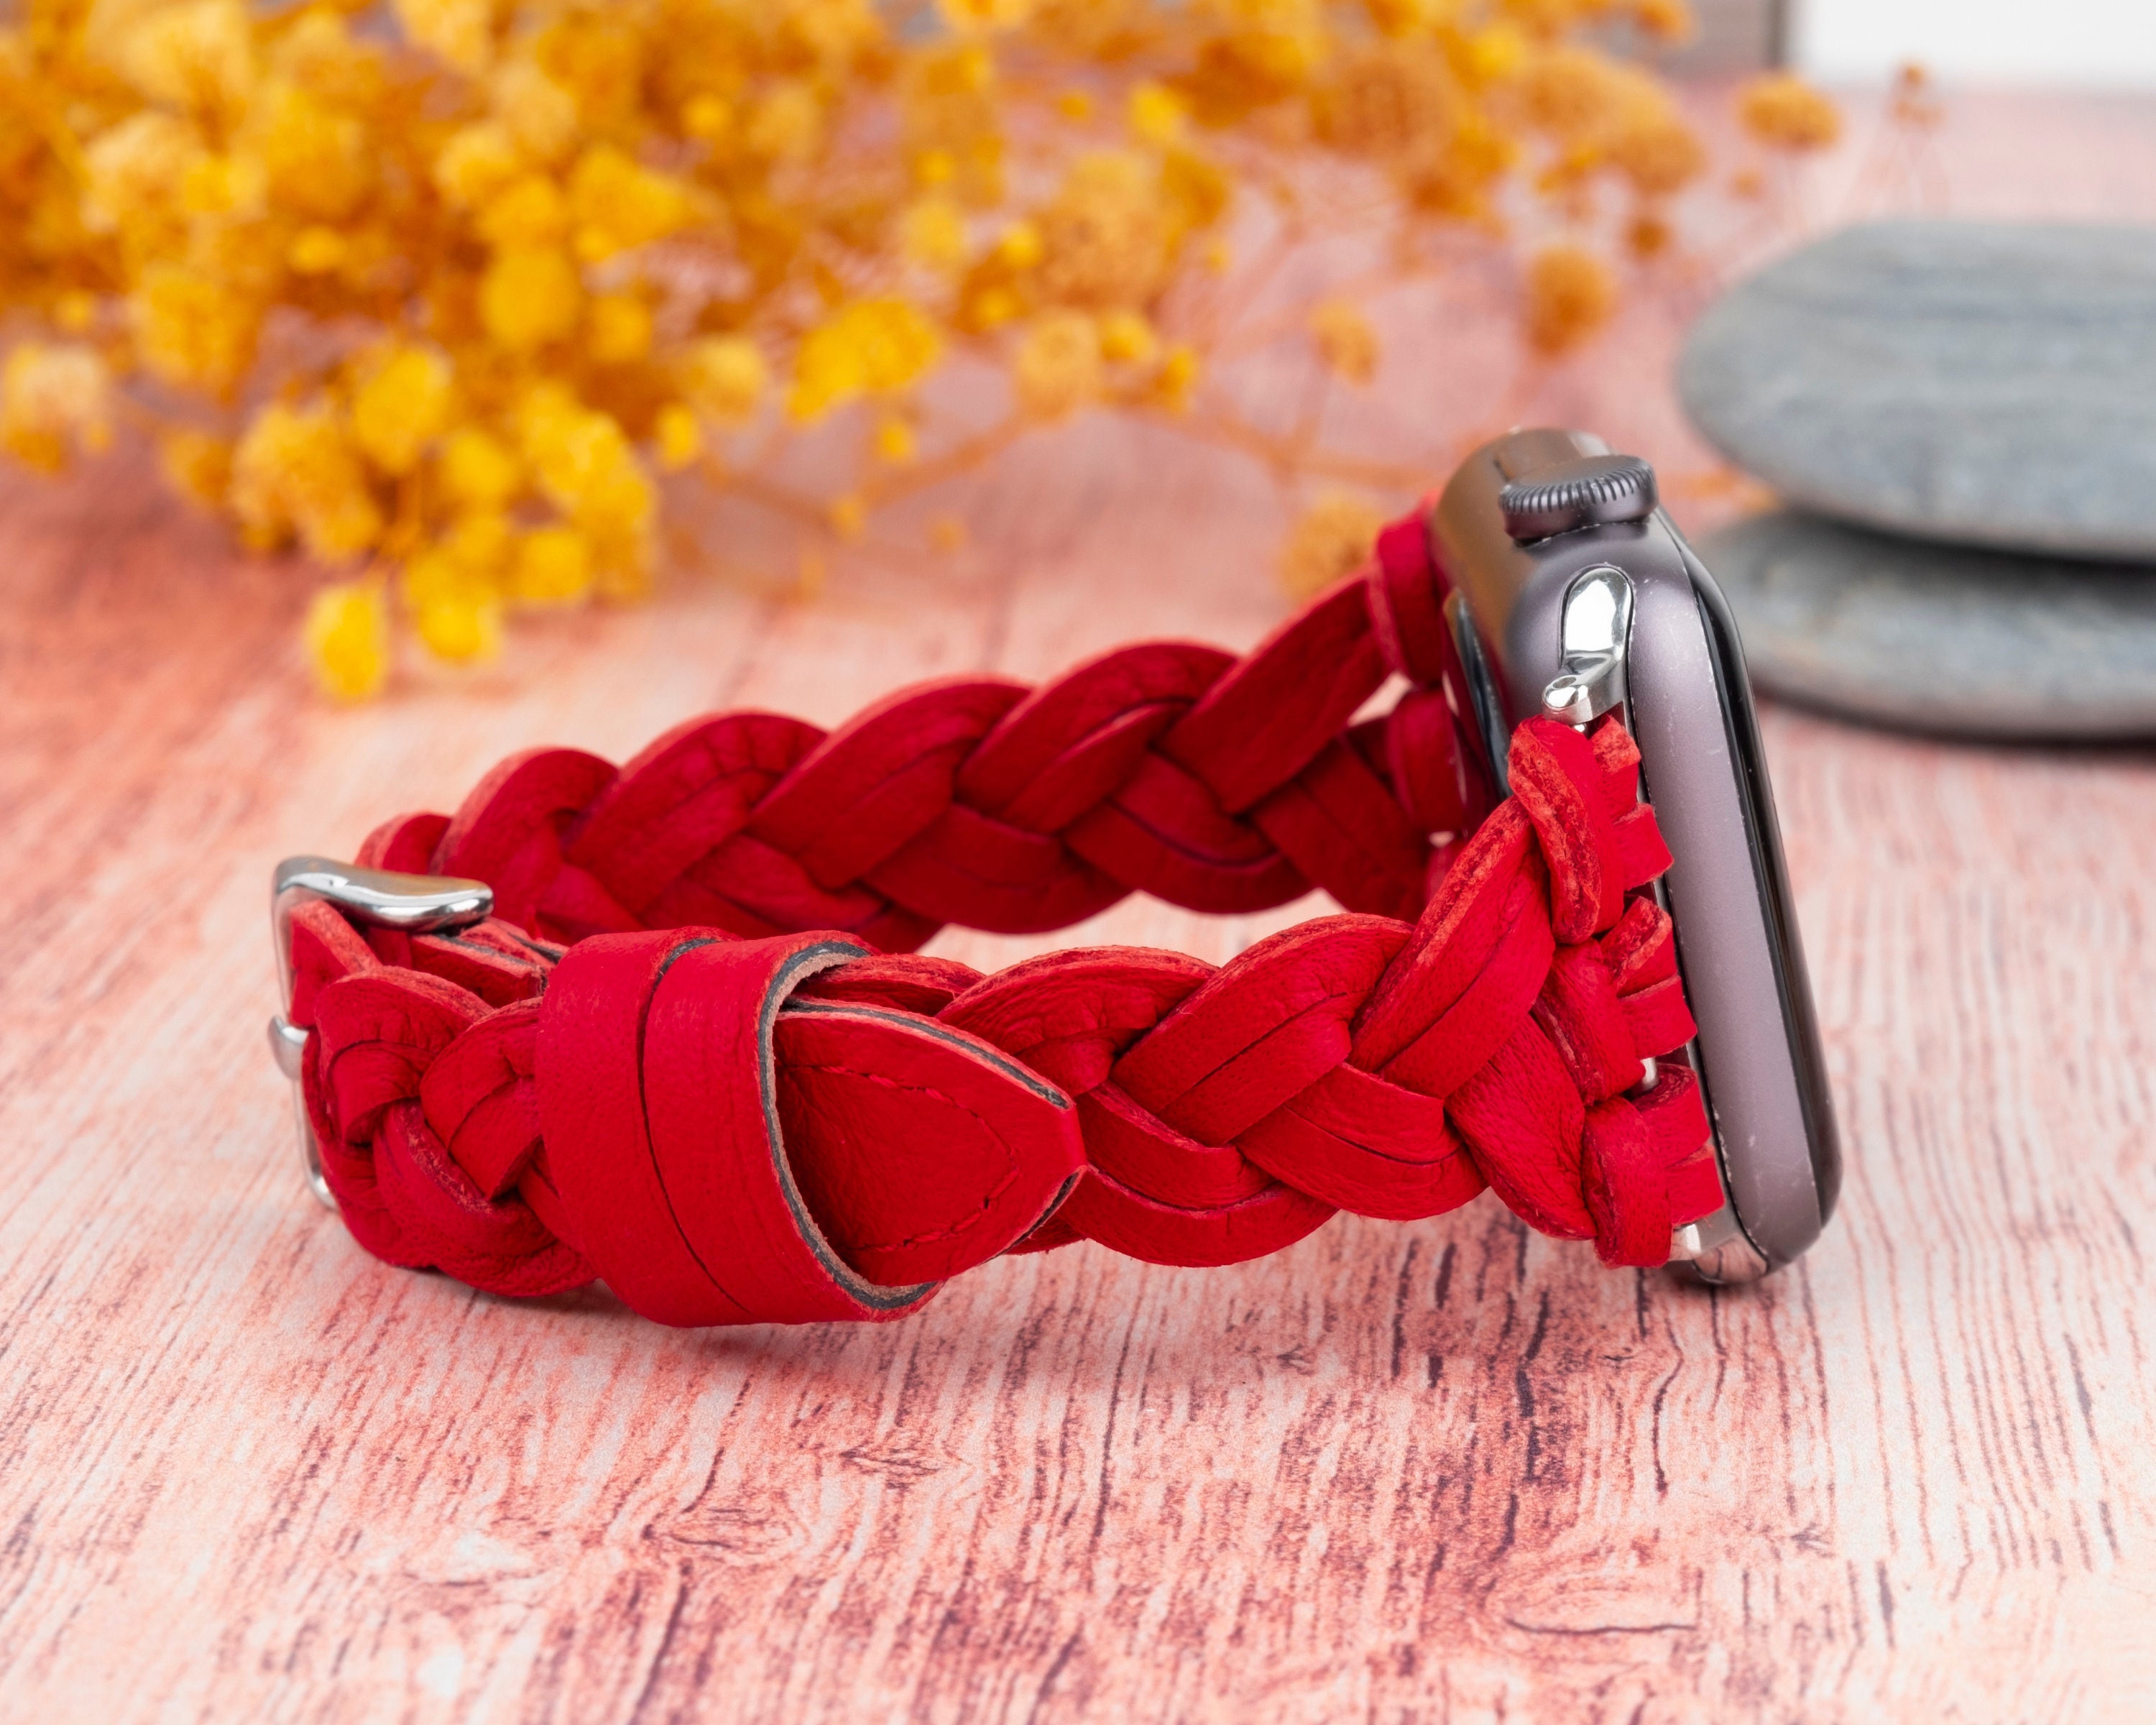 Buy Braided Iwatch Band Online In India -  India